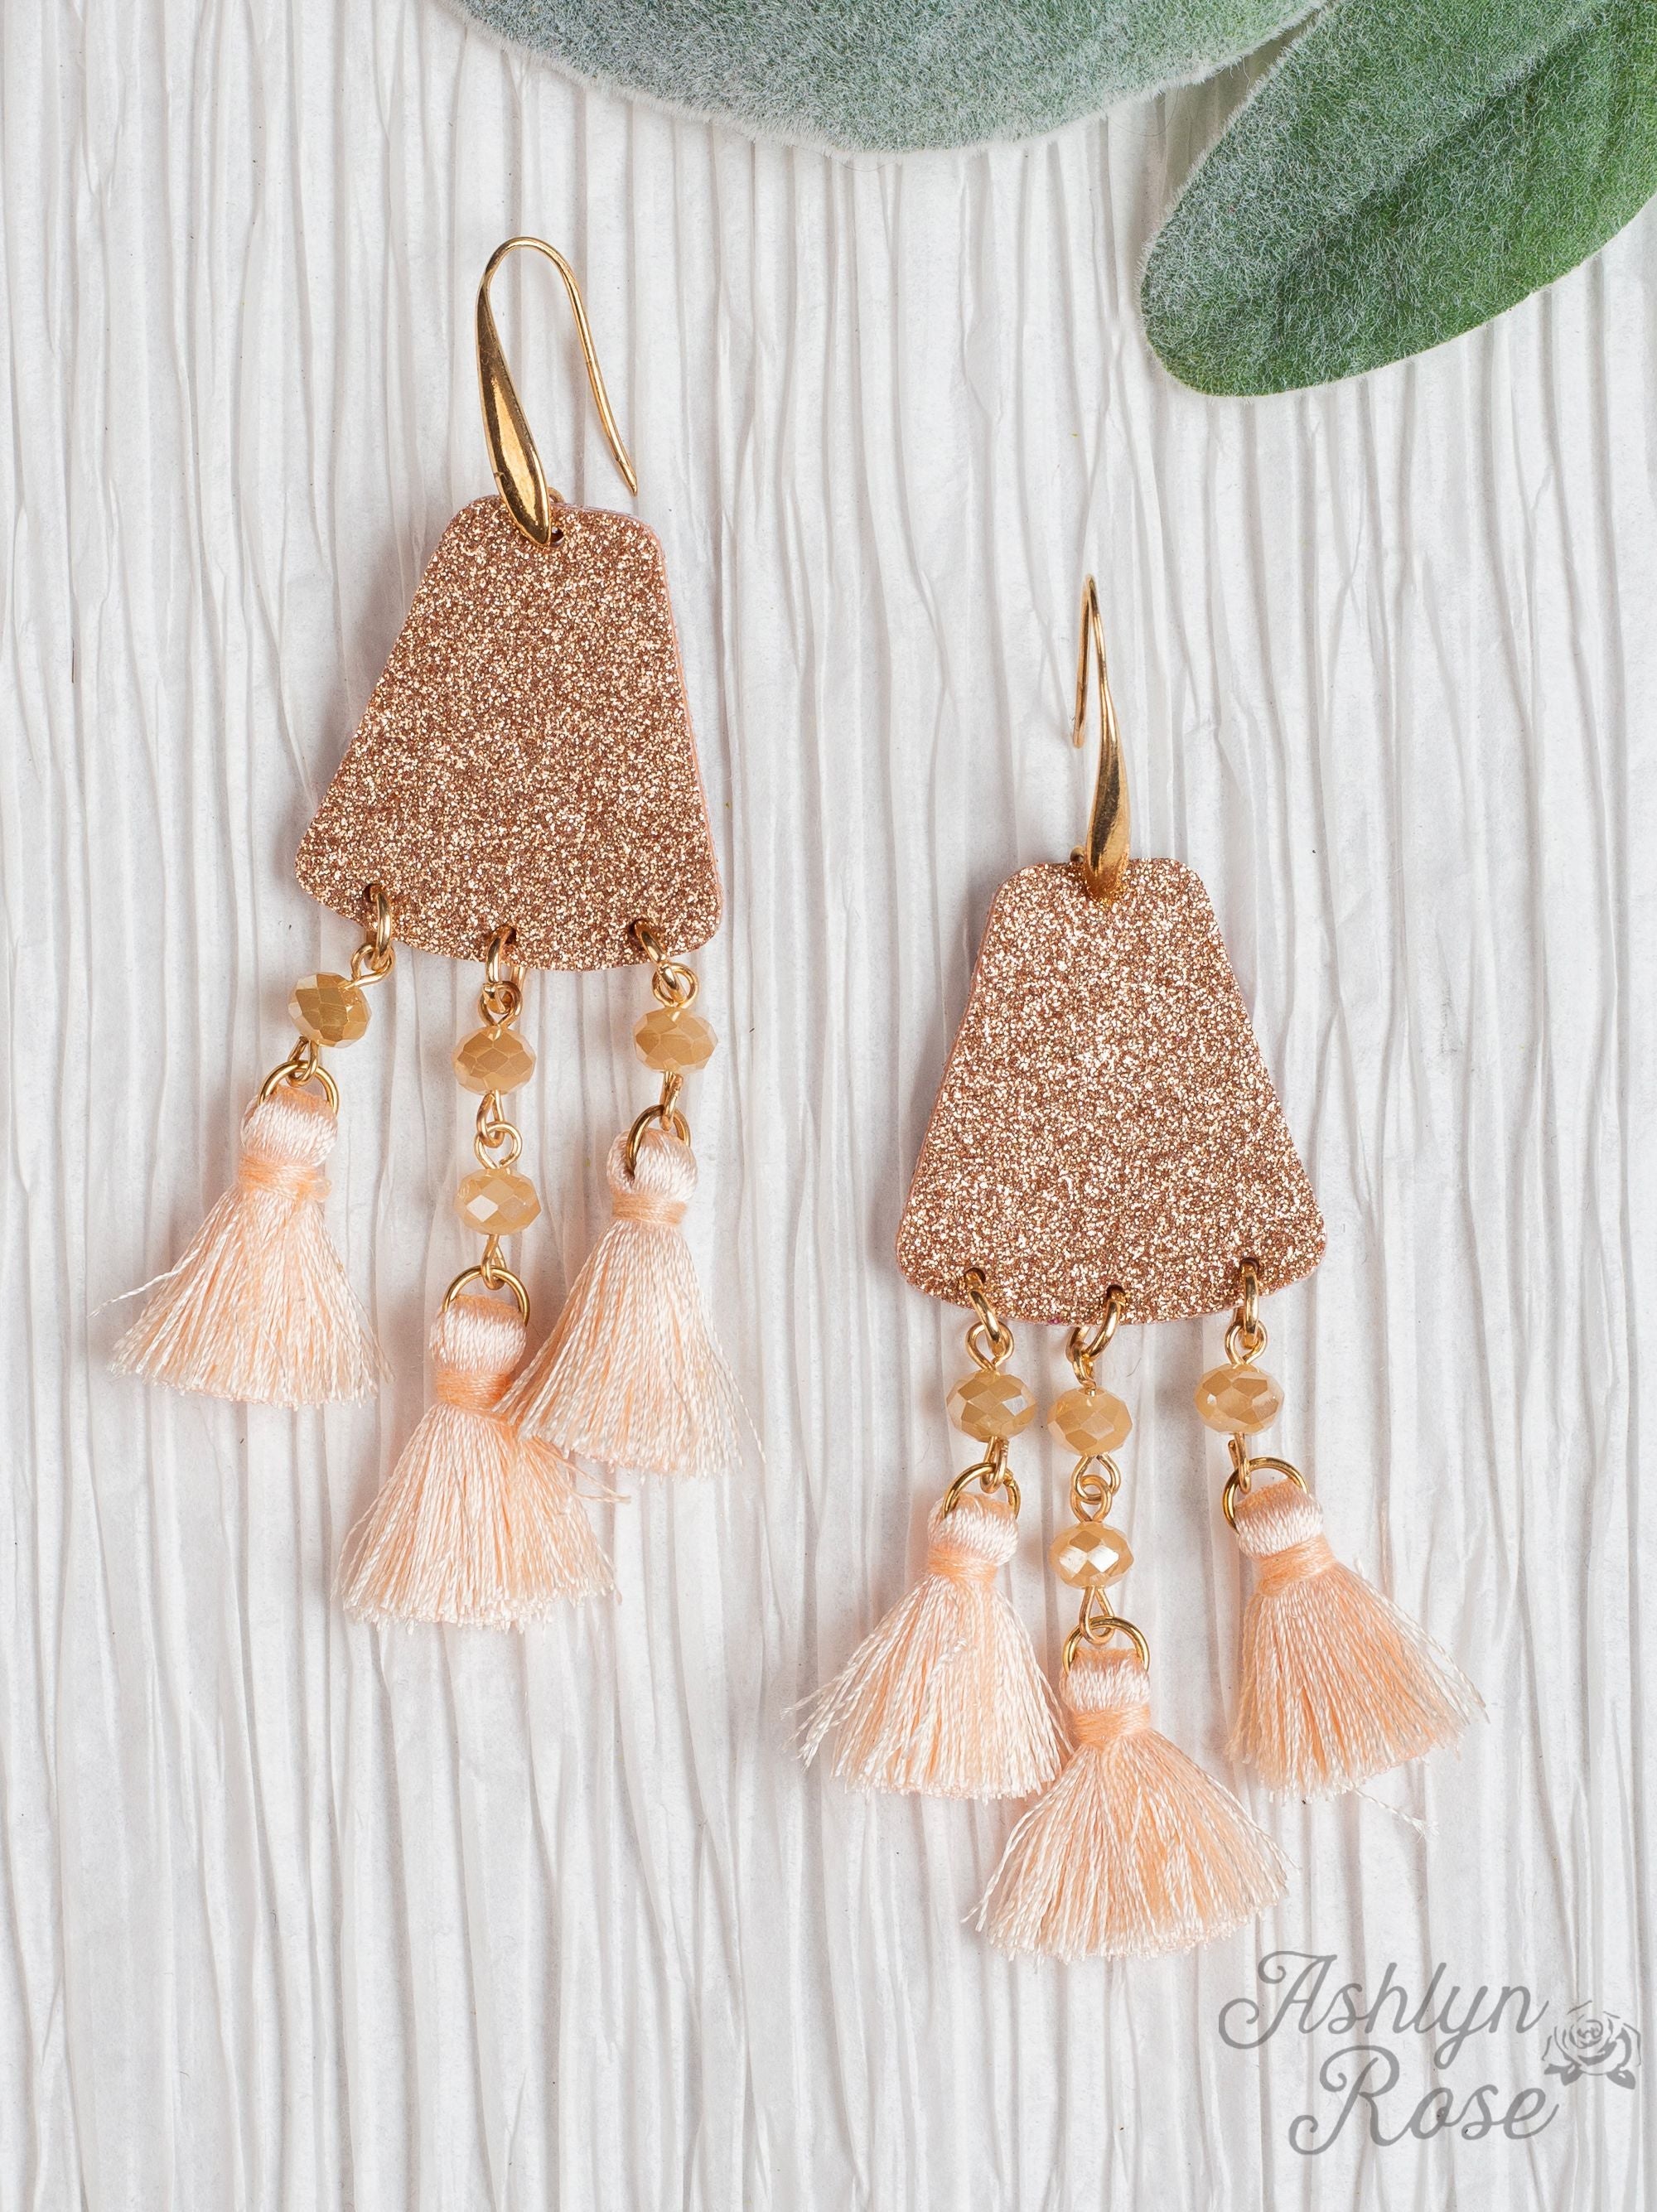 Let's Sparkle Together with Rose Gold Glitter and Tassels